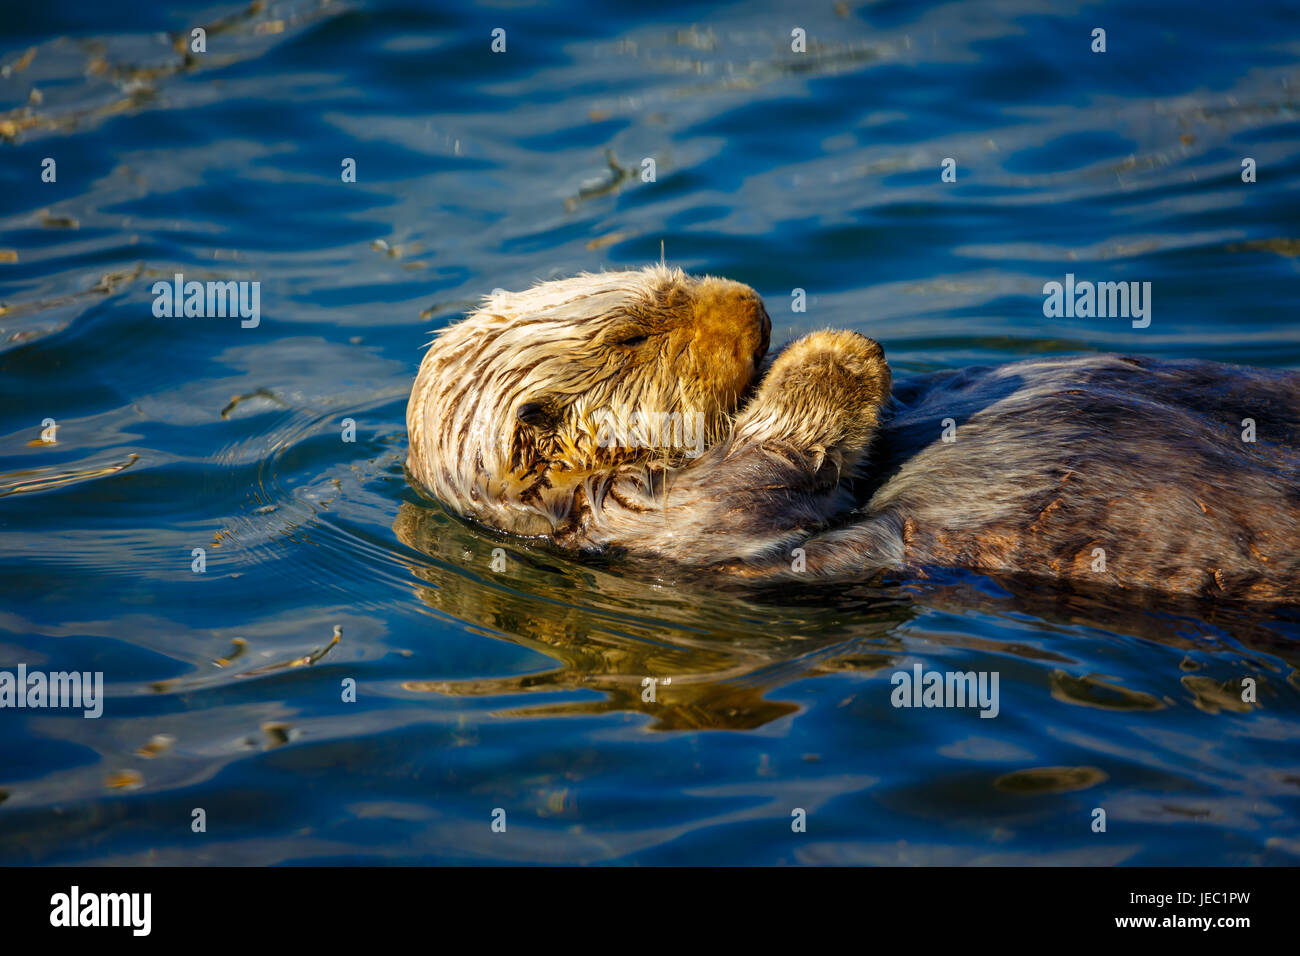 Sleeping sea otter, Enhydra lutris, floats on the blue ripples of a calm ocean Stock Photo